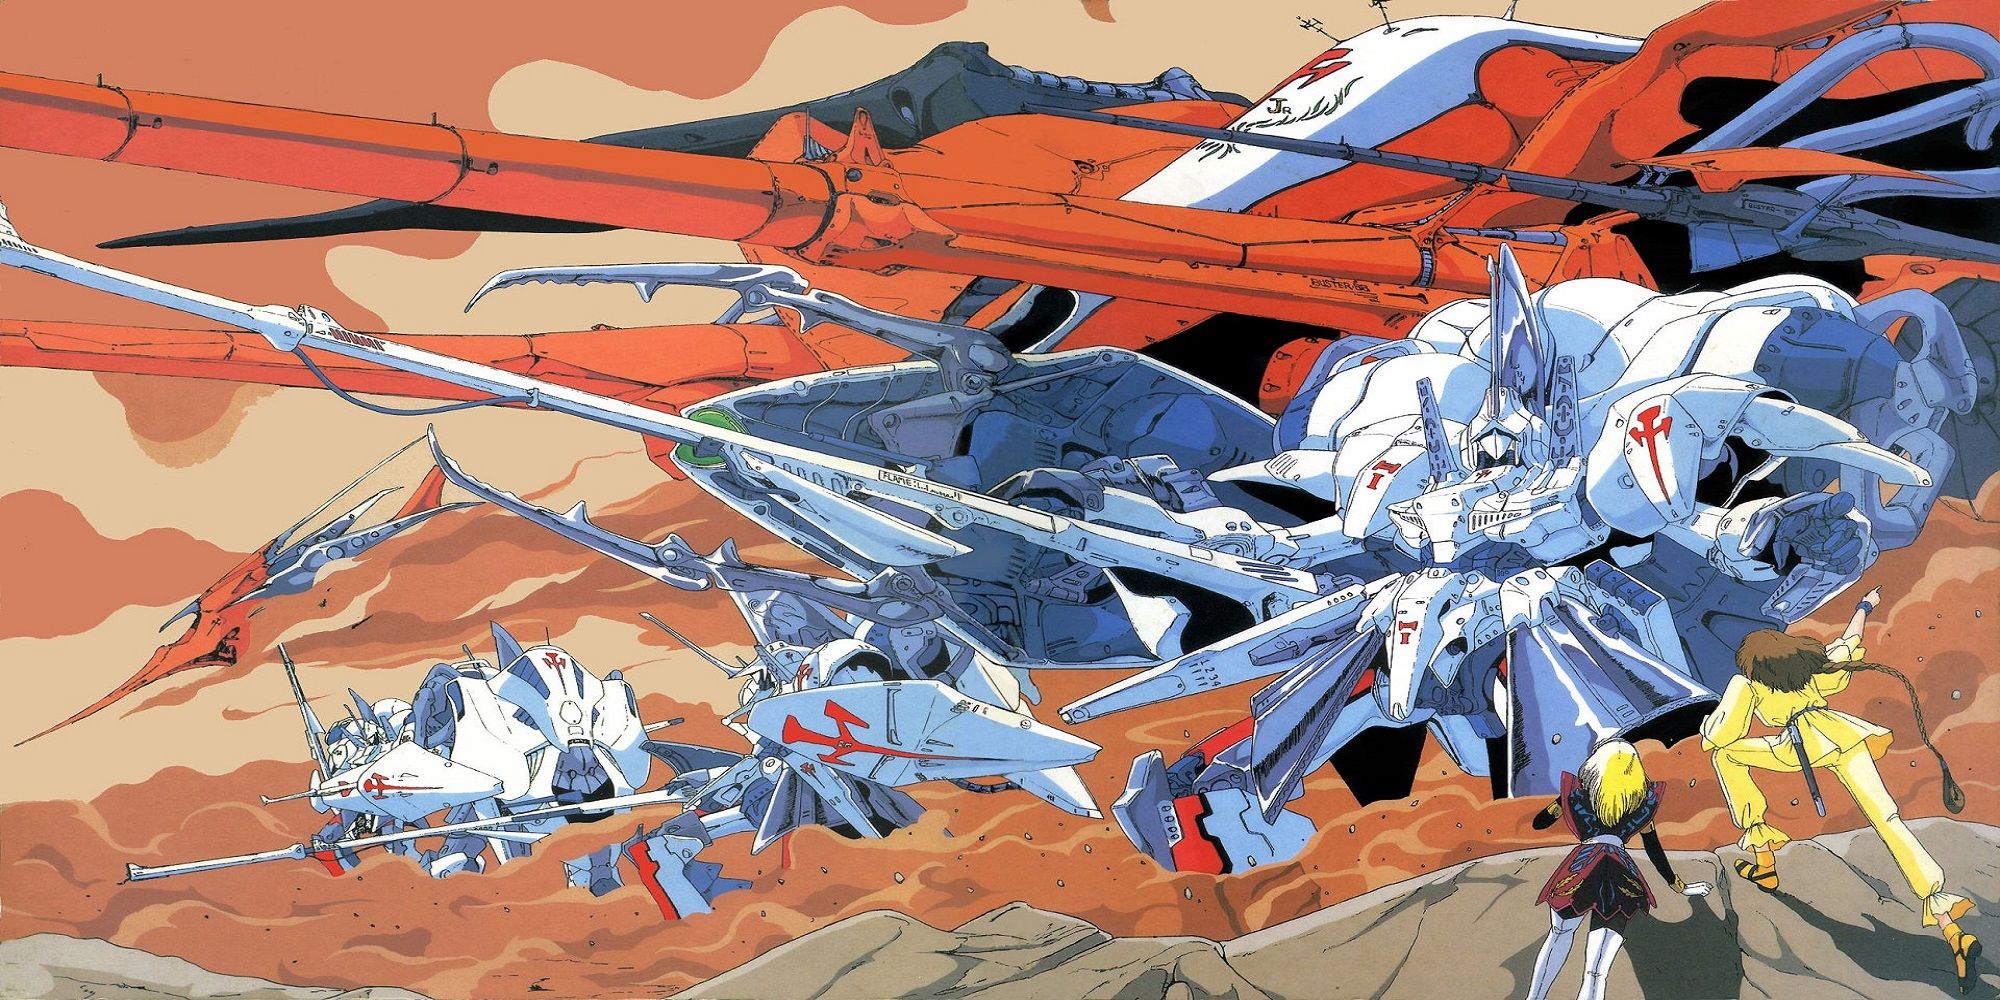 The mecha of Five Star Stories looking epic, while human characters look on shocked.